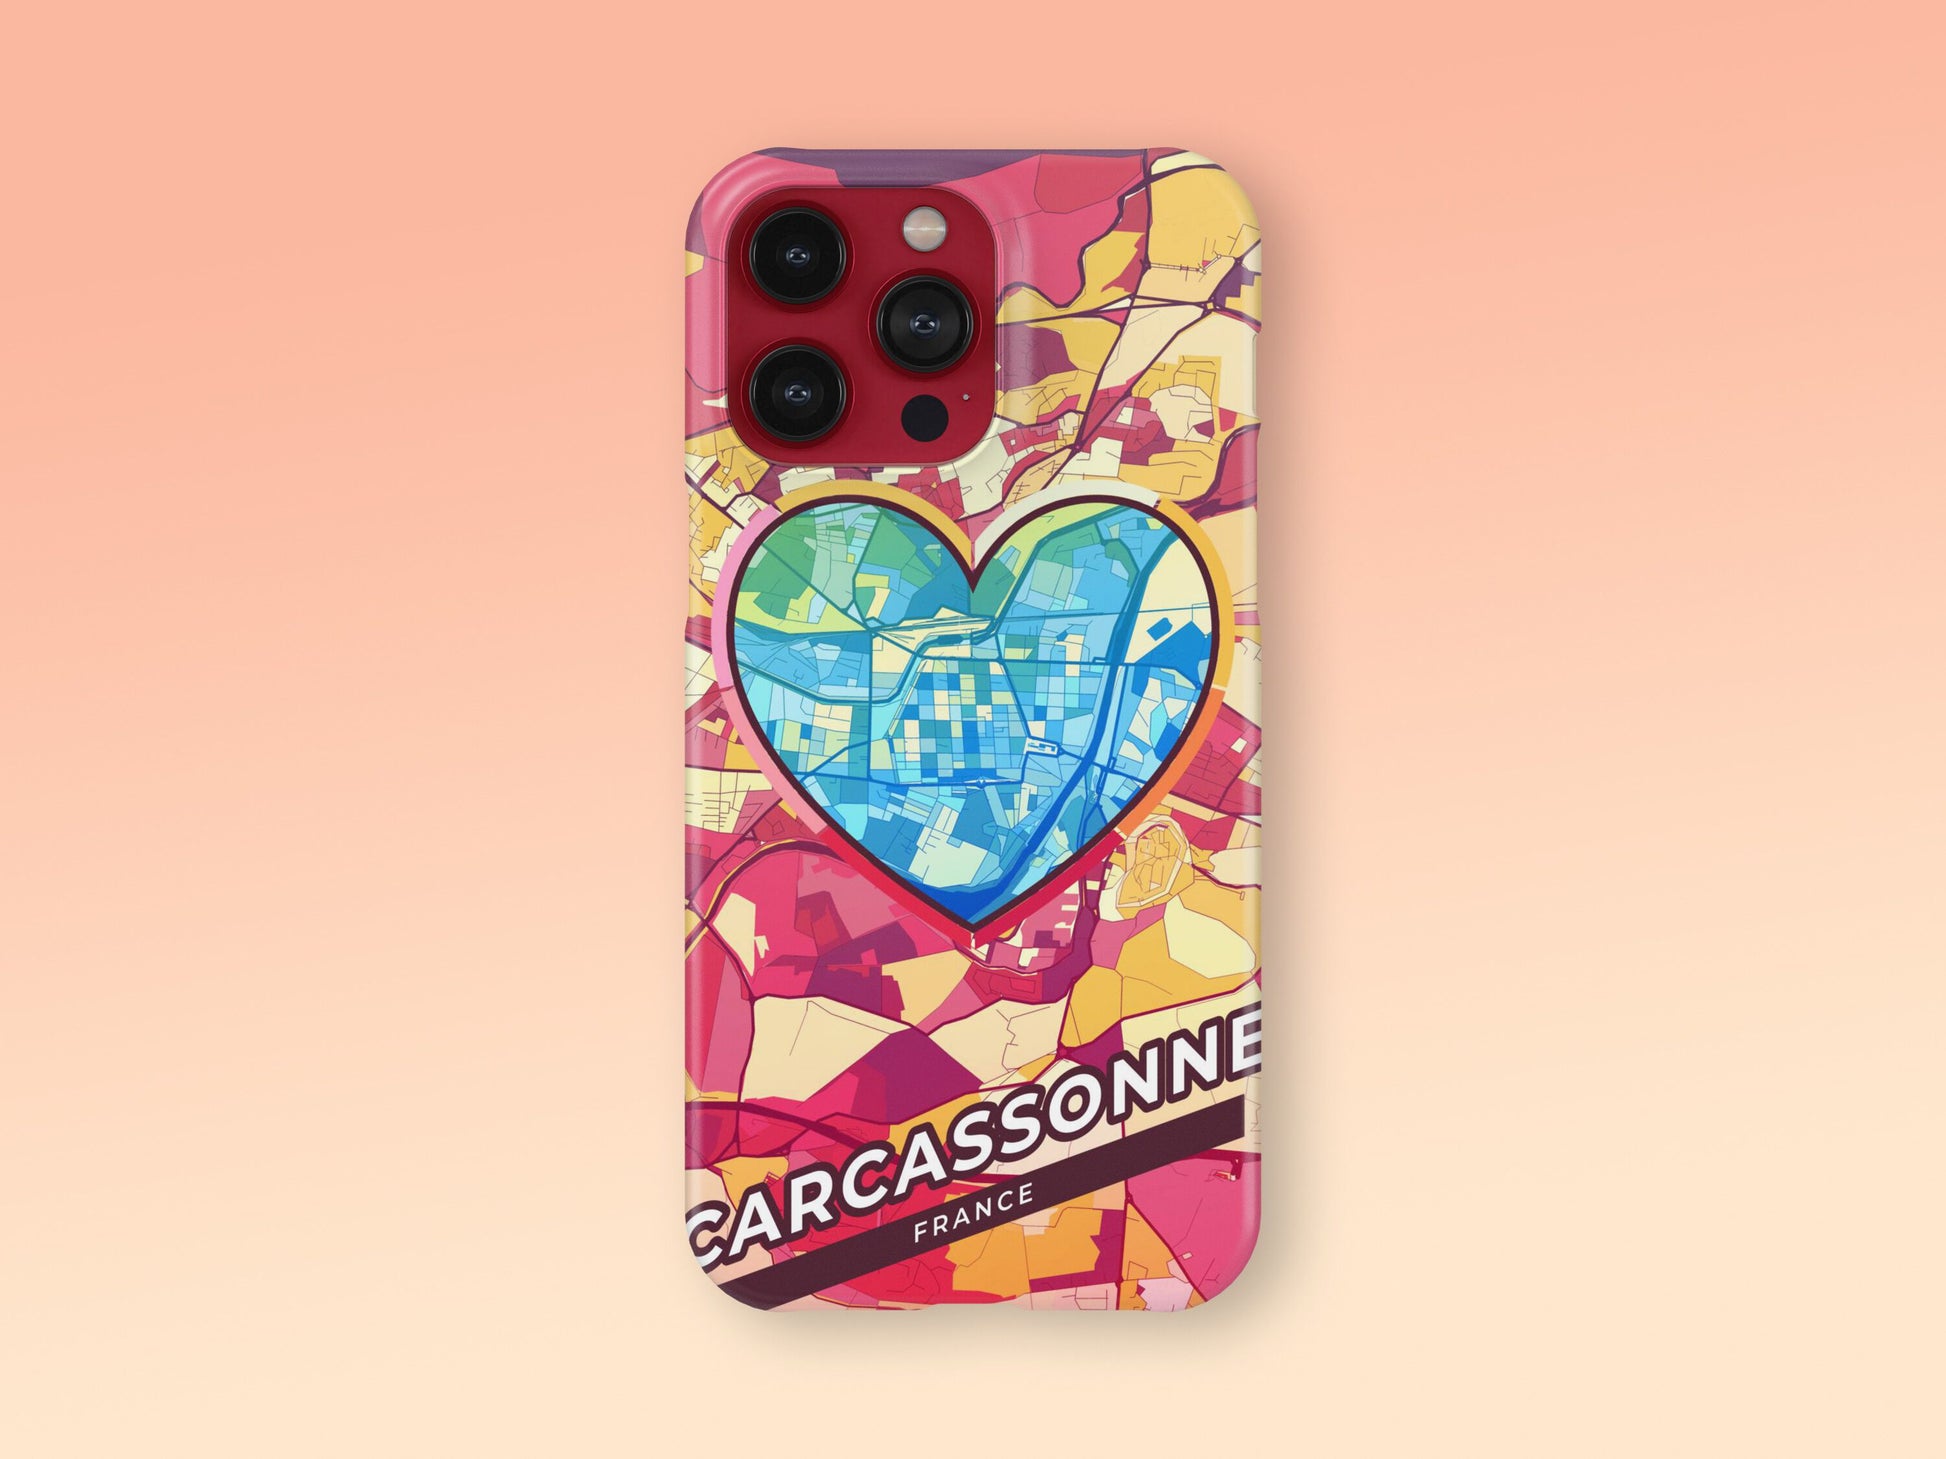 Carcassonne France slim phone case with colorful icon. Birthday, wedding or housewarming gift. Couple match cases. 2